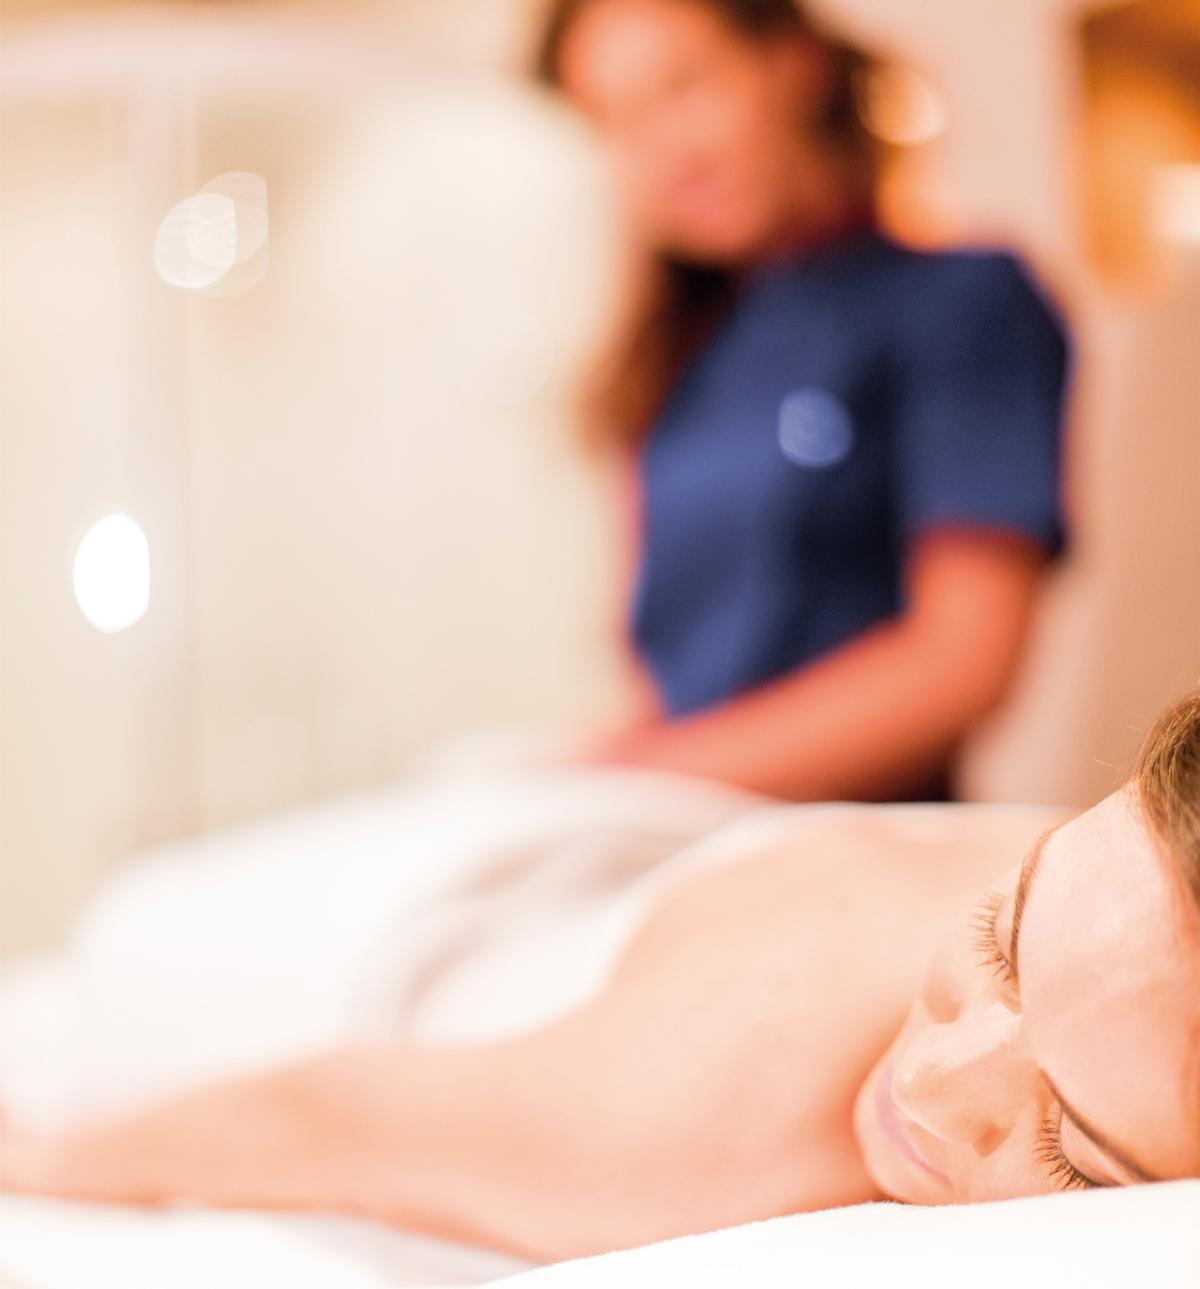 The treatments will be developed to be brand-neutral, so therapists will be able to administer them in conjunction with their own spa-speciality products / 